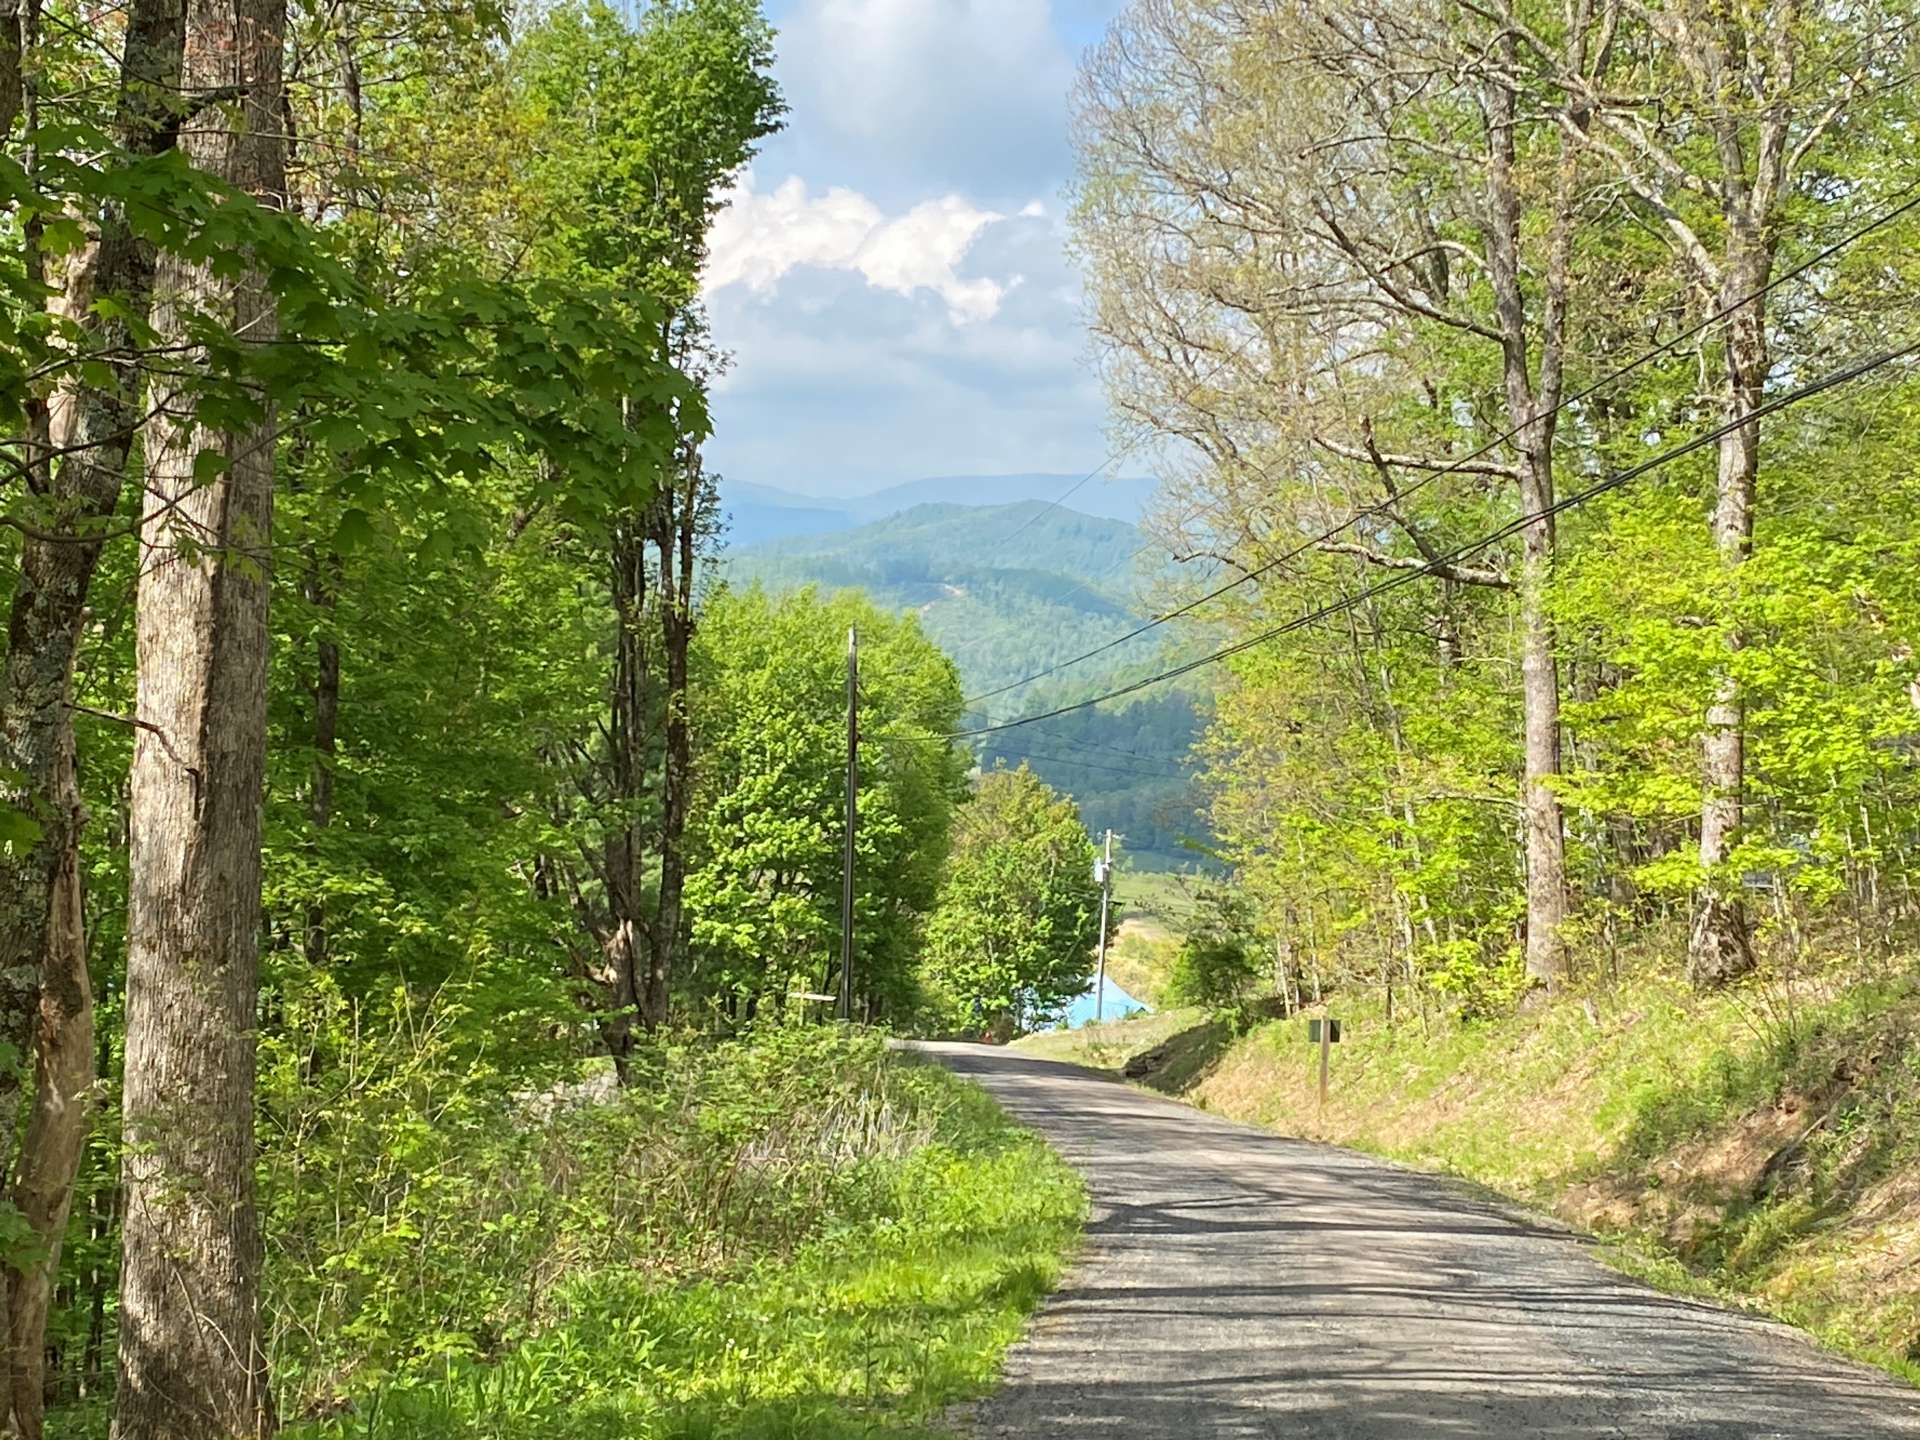 A private graveled road leads into the community where you will find a sense of  a close knit neighborhood offering a great location central to both Boone and West Jefferson.